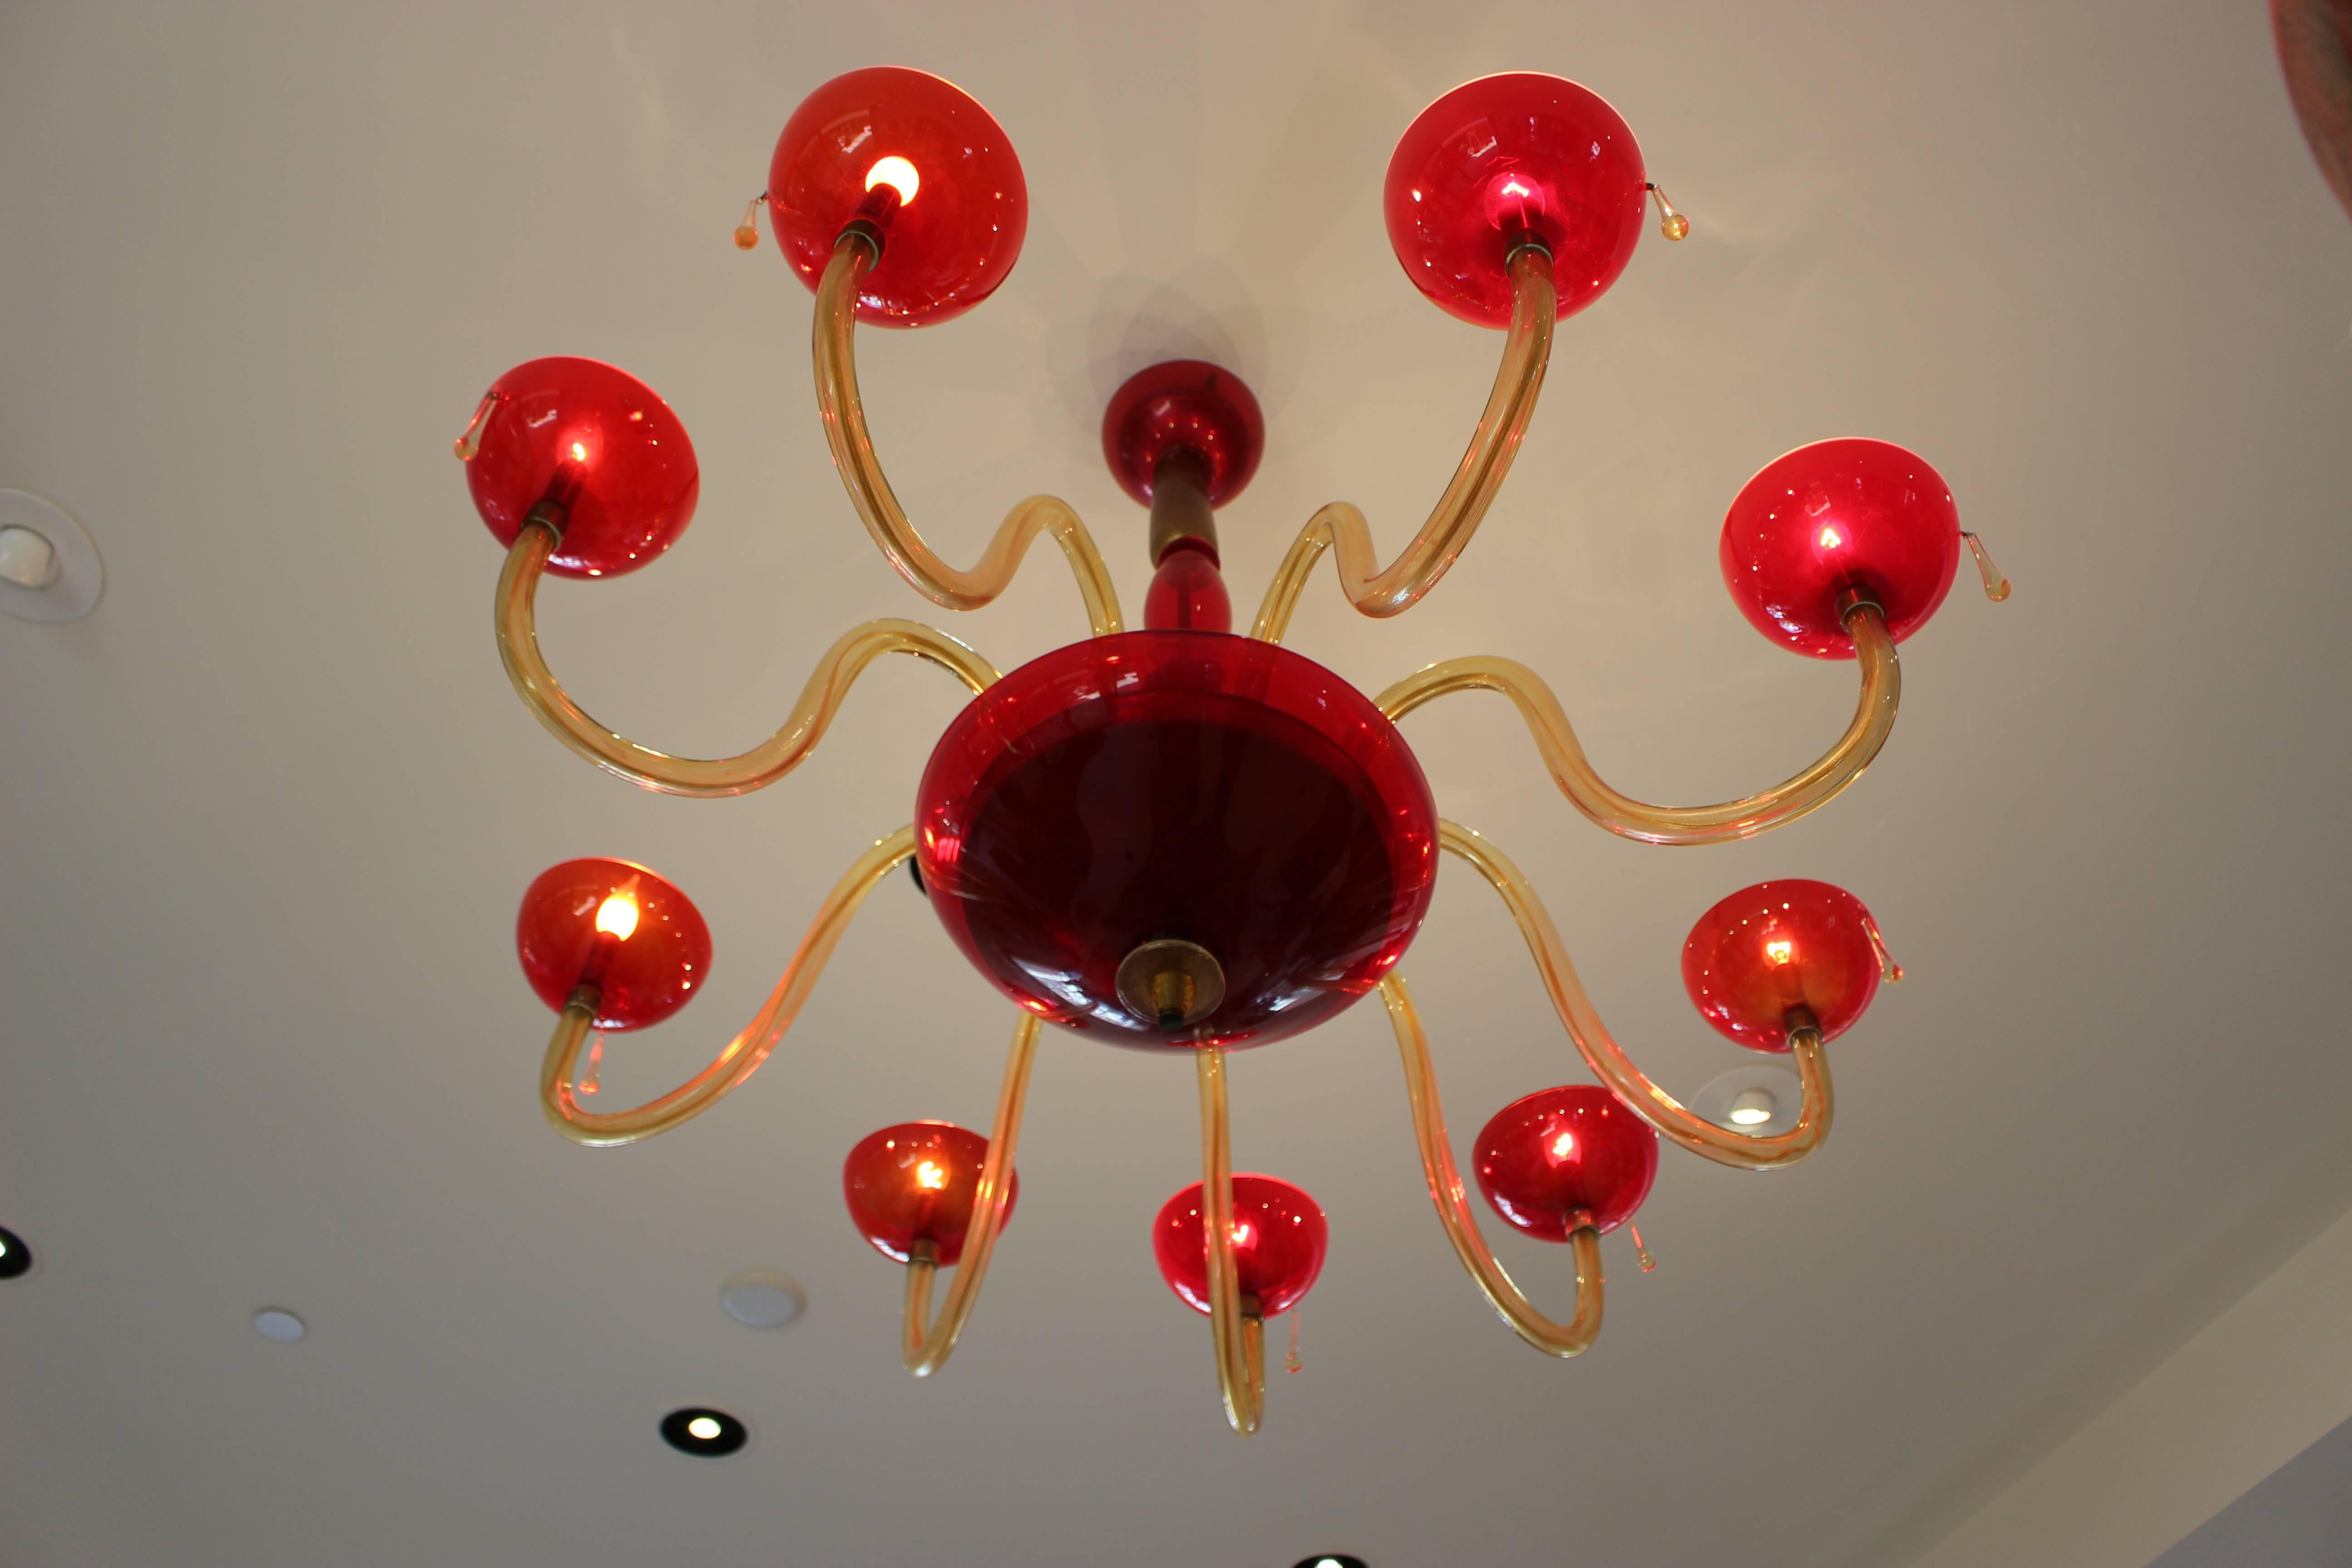 An Italian vintage ruby, gold and colorless nine-light Murano chandelier from the second half of the 20th century. This graceful handcrafted Italian Murano chandelier is composed of luxurious ruby, gold-colored and colorless glass and features a